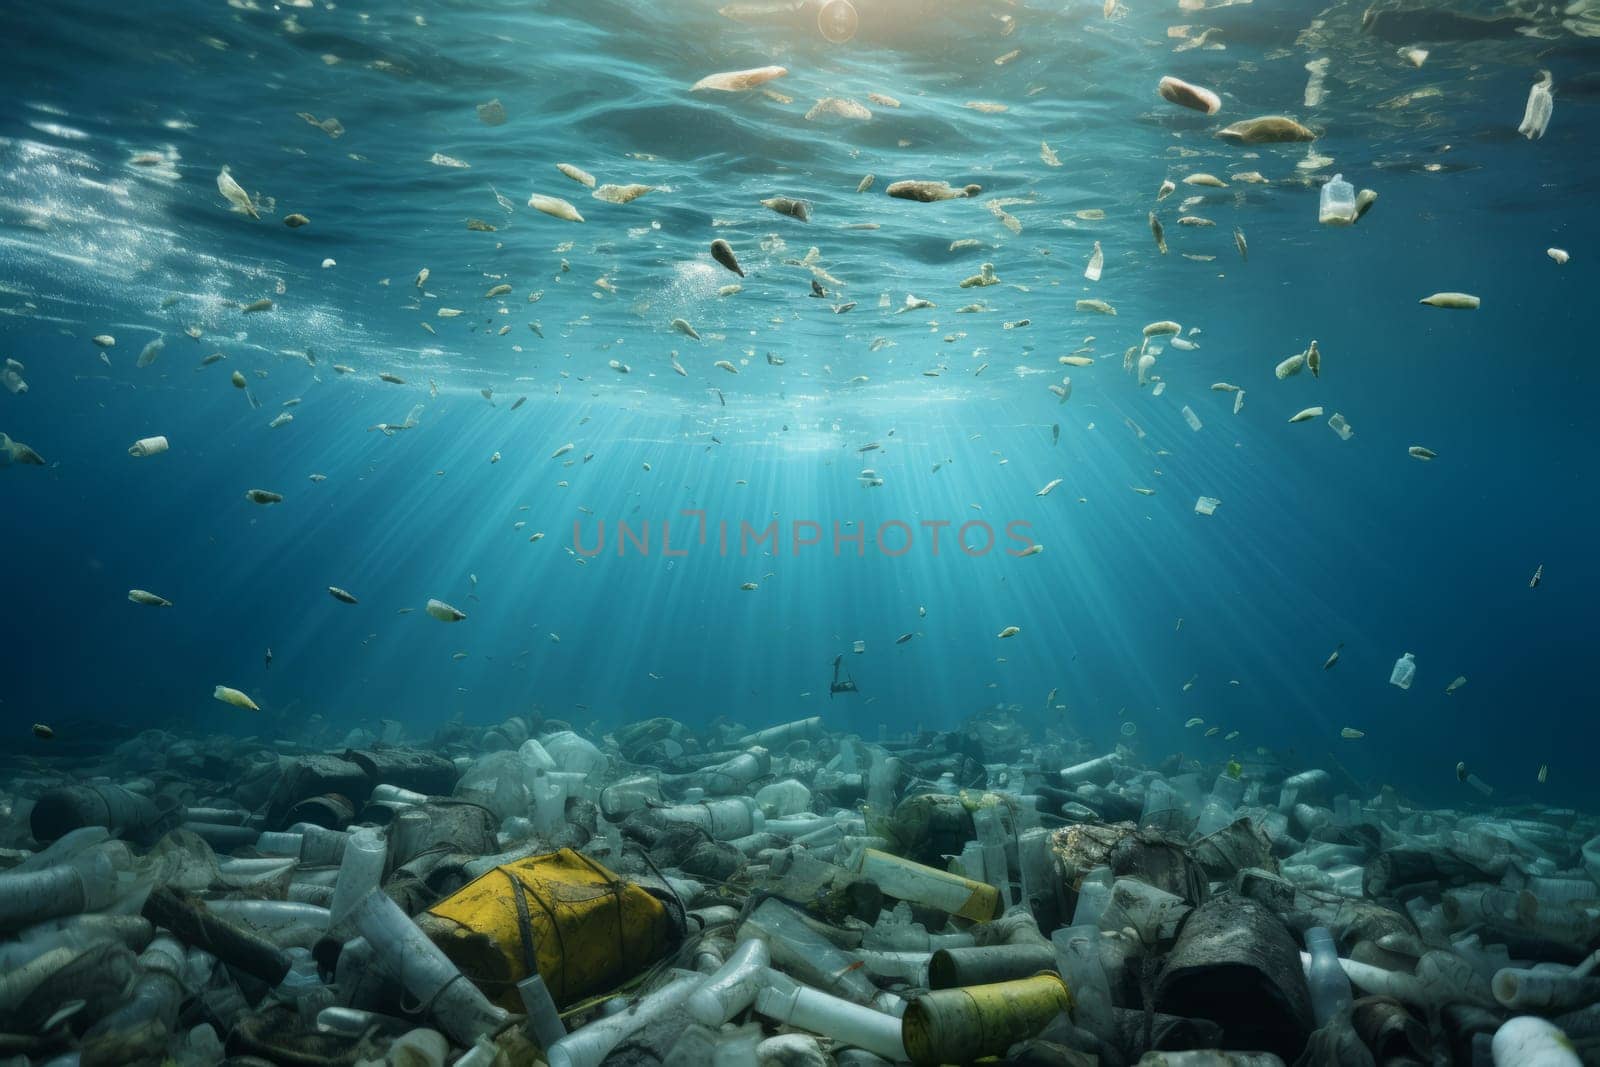 Plastic bottles and microplastics in the ocean by rusak